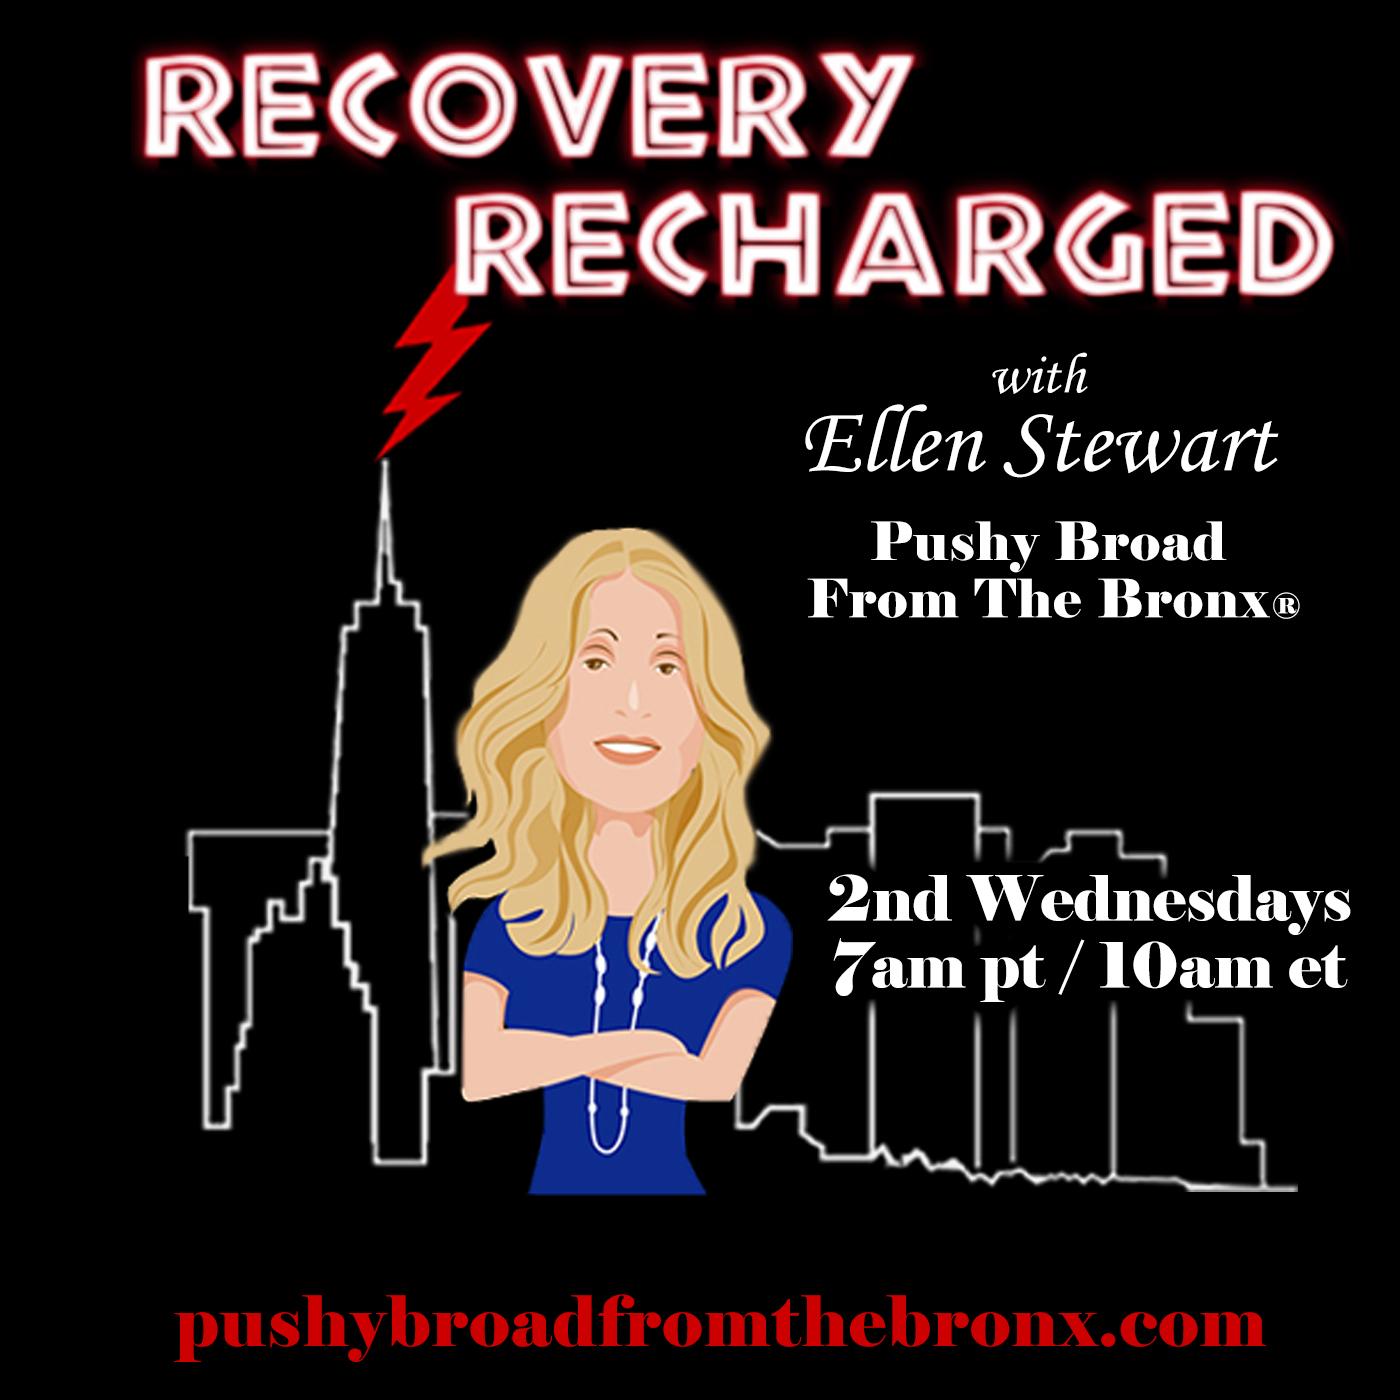 Recovery Recharged with Ellen Stewart: The Pushy Broad From The Bronx®